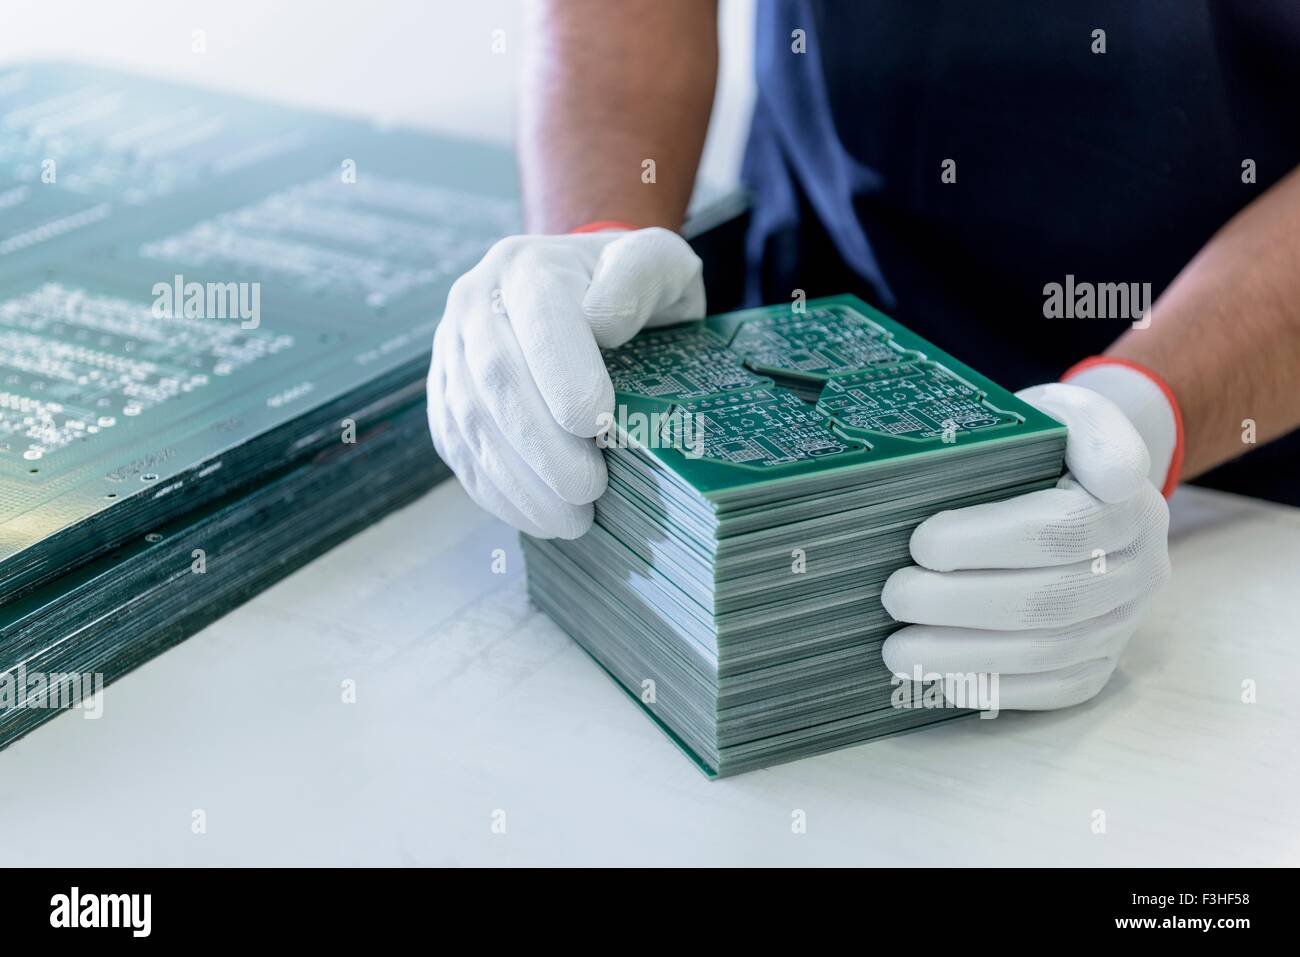 Worker arranging cut circuit boards in circuit board factory Stock Photo